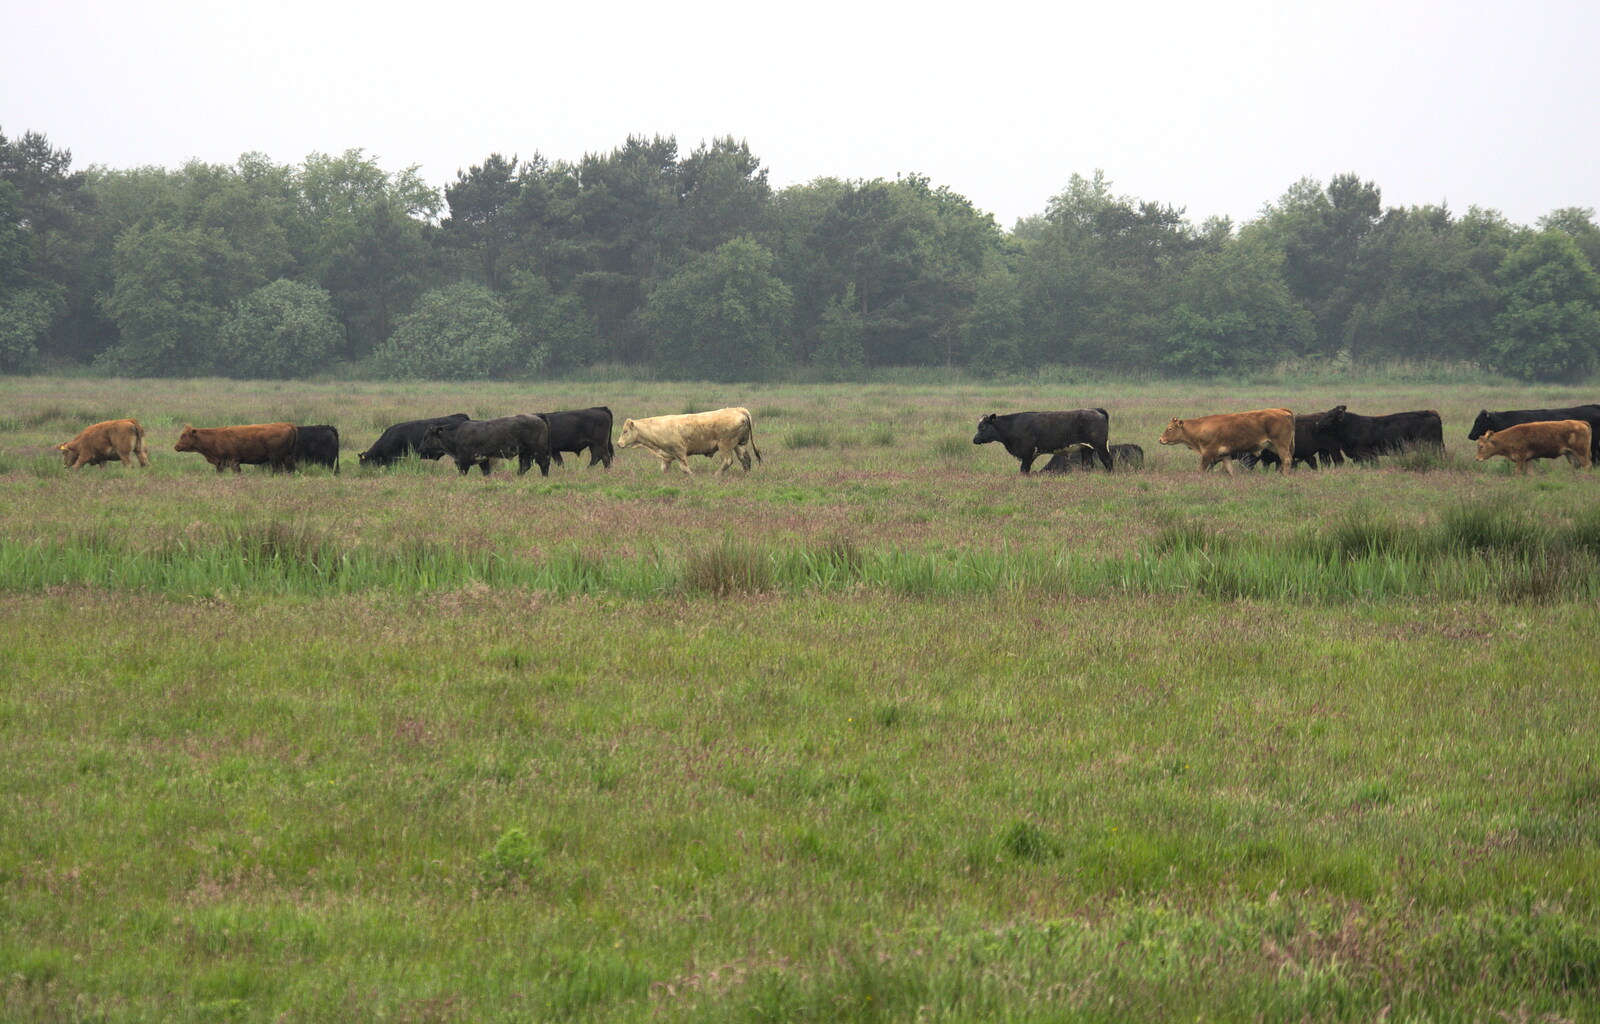 Cows on the marshes from A Wet Weekend of Camping, Waxham Sands, Norfolk - 13th June 2015